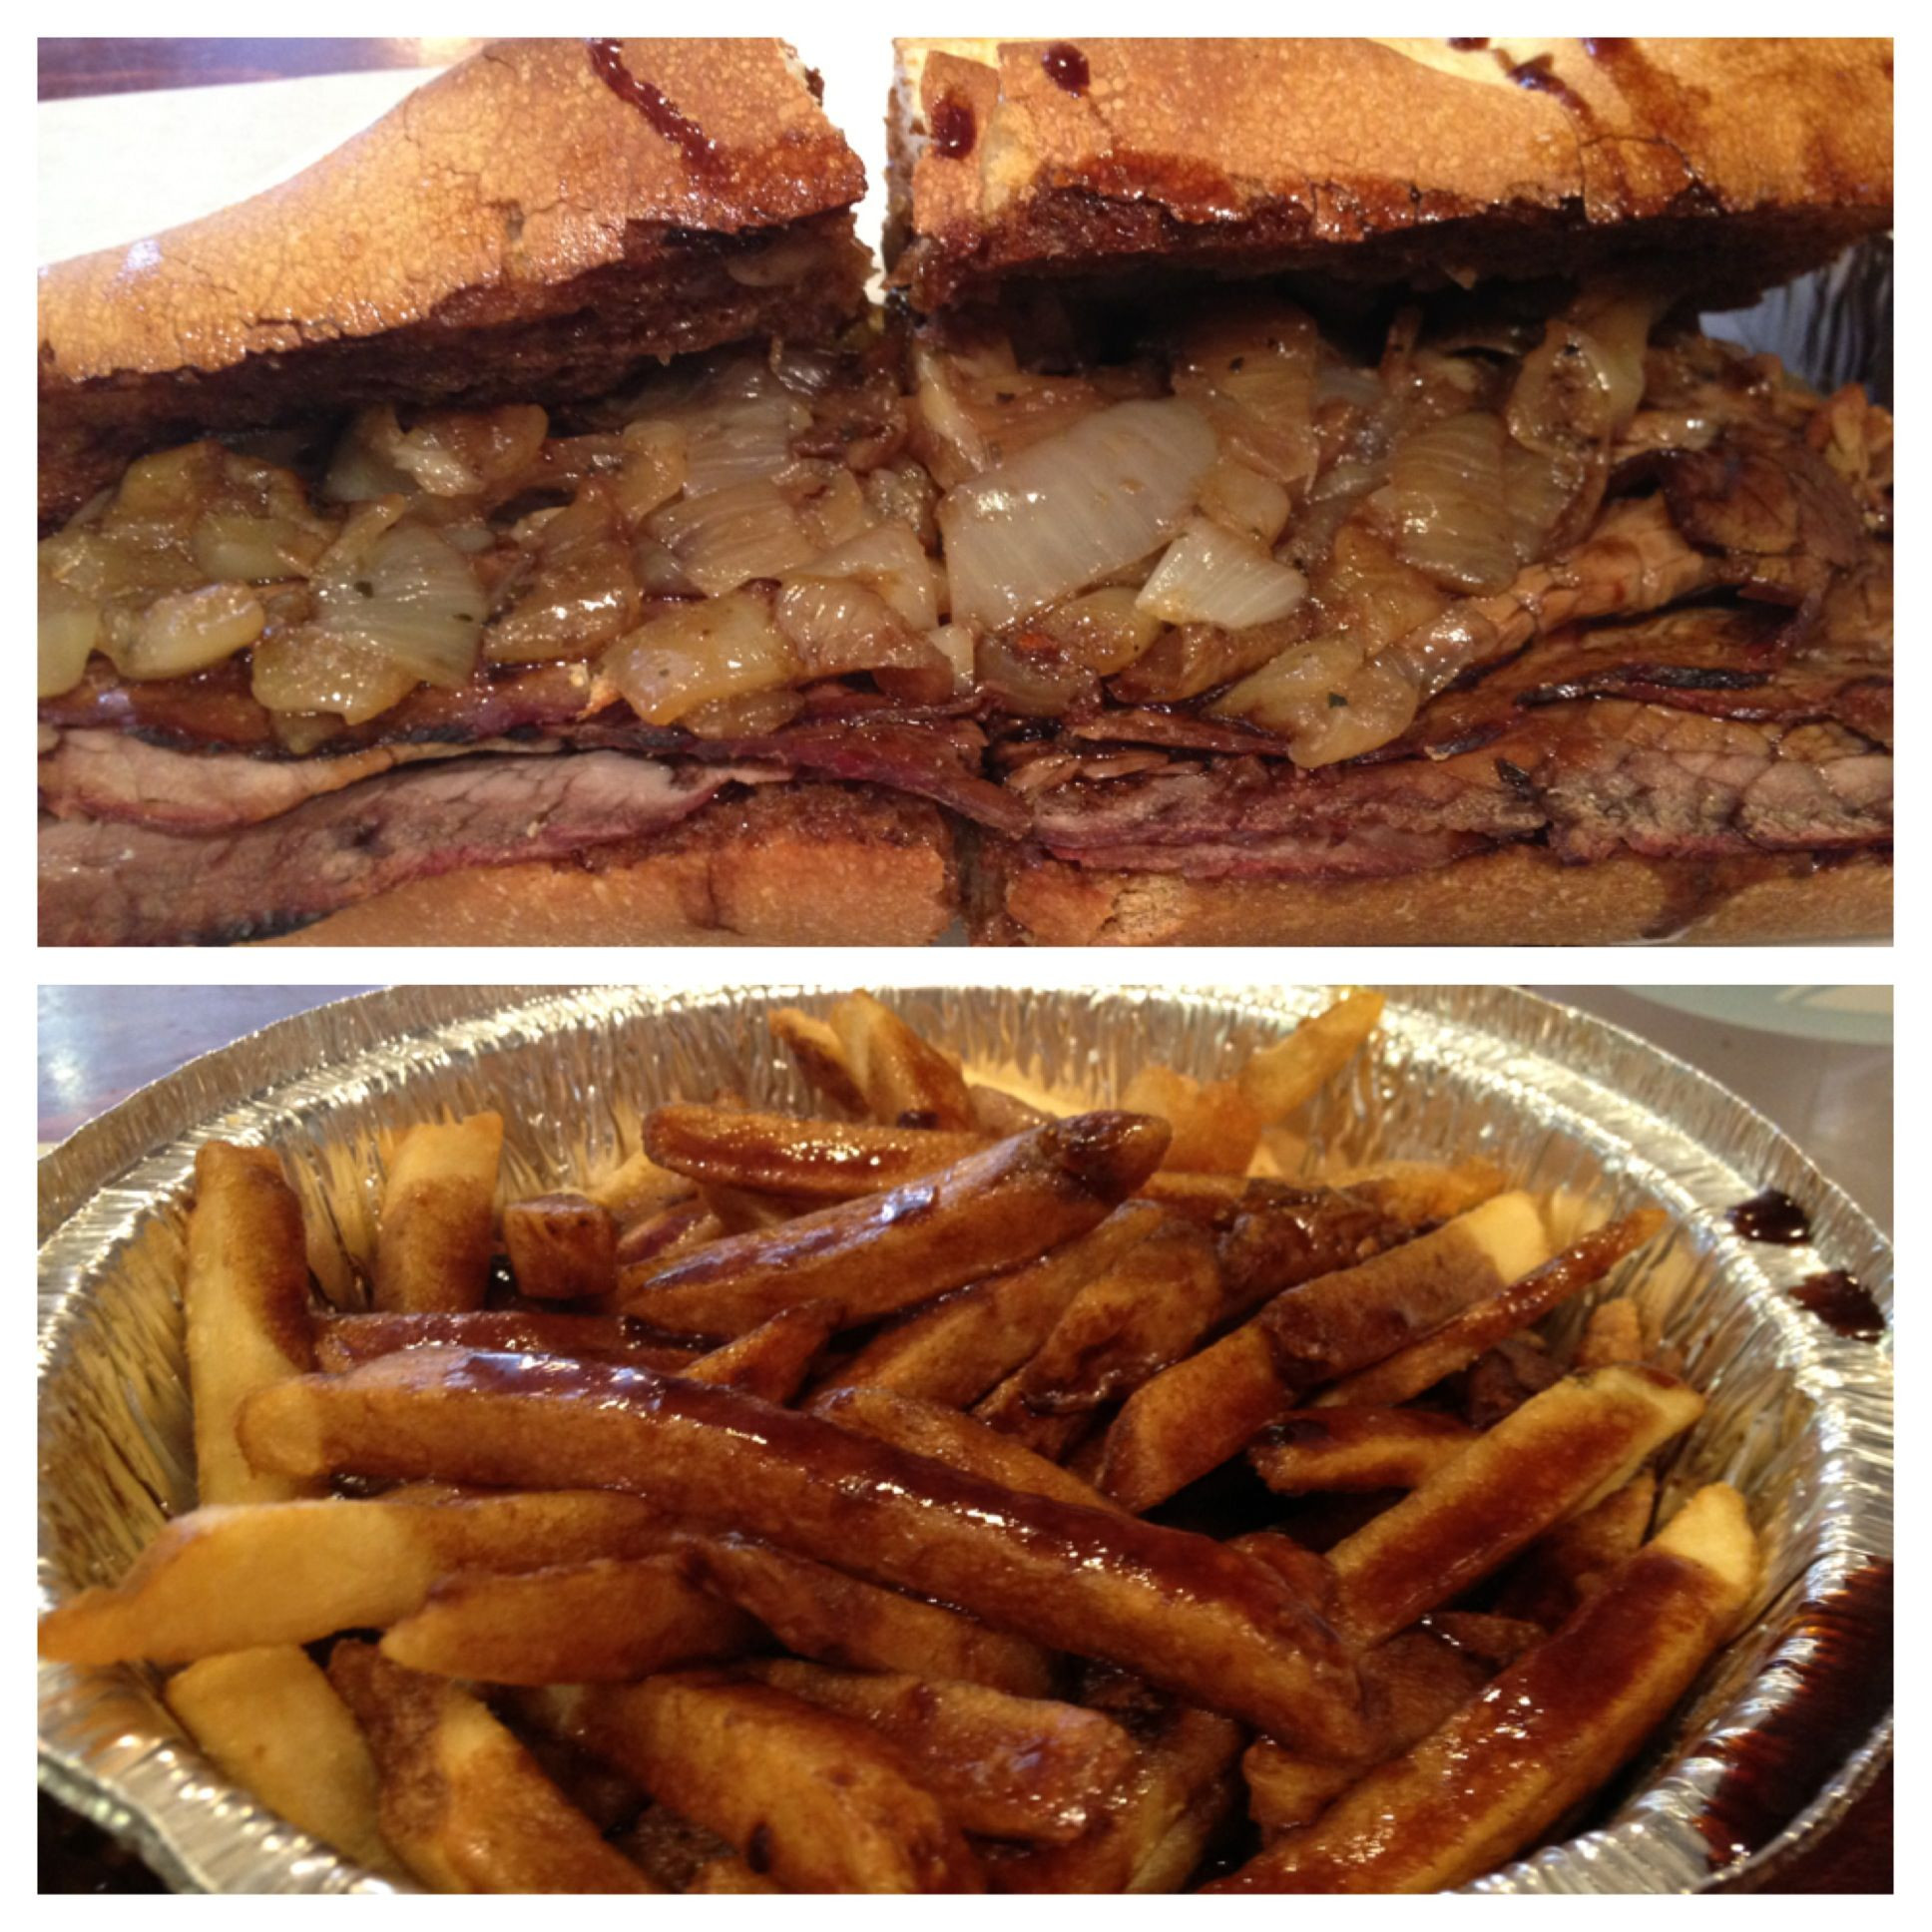 Hot Roast Beef Sandwiches With Gravy
 Hot roast beef sandwich with onions and fries both topped